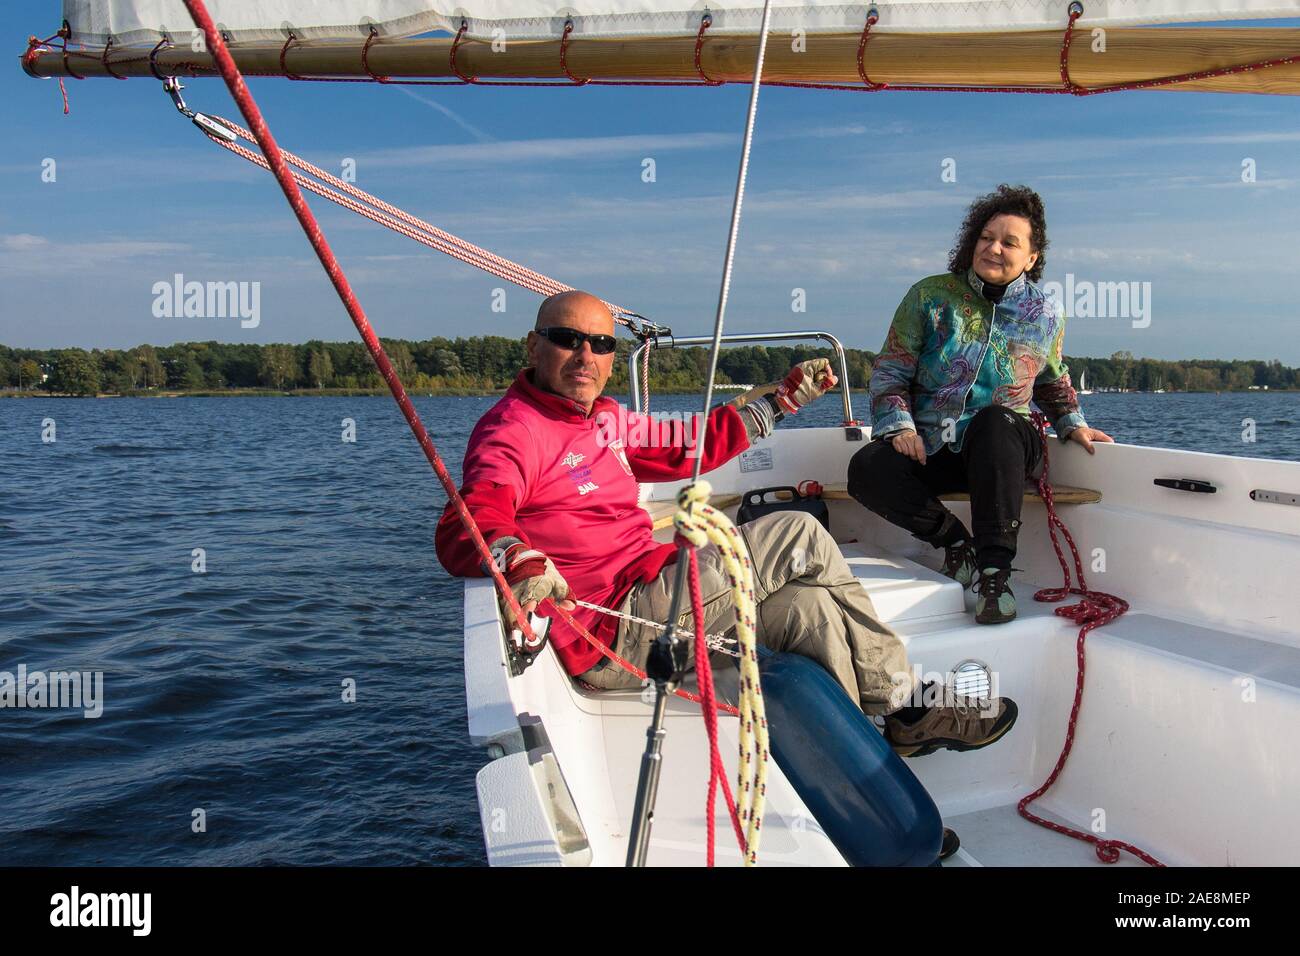 A couple sailing a large boat on the Zegrze Reservoir, Poland Stock Photo